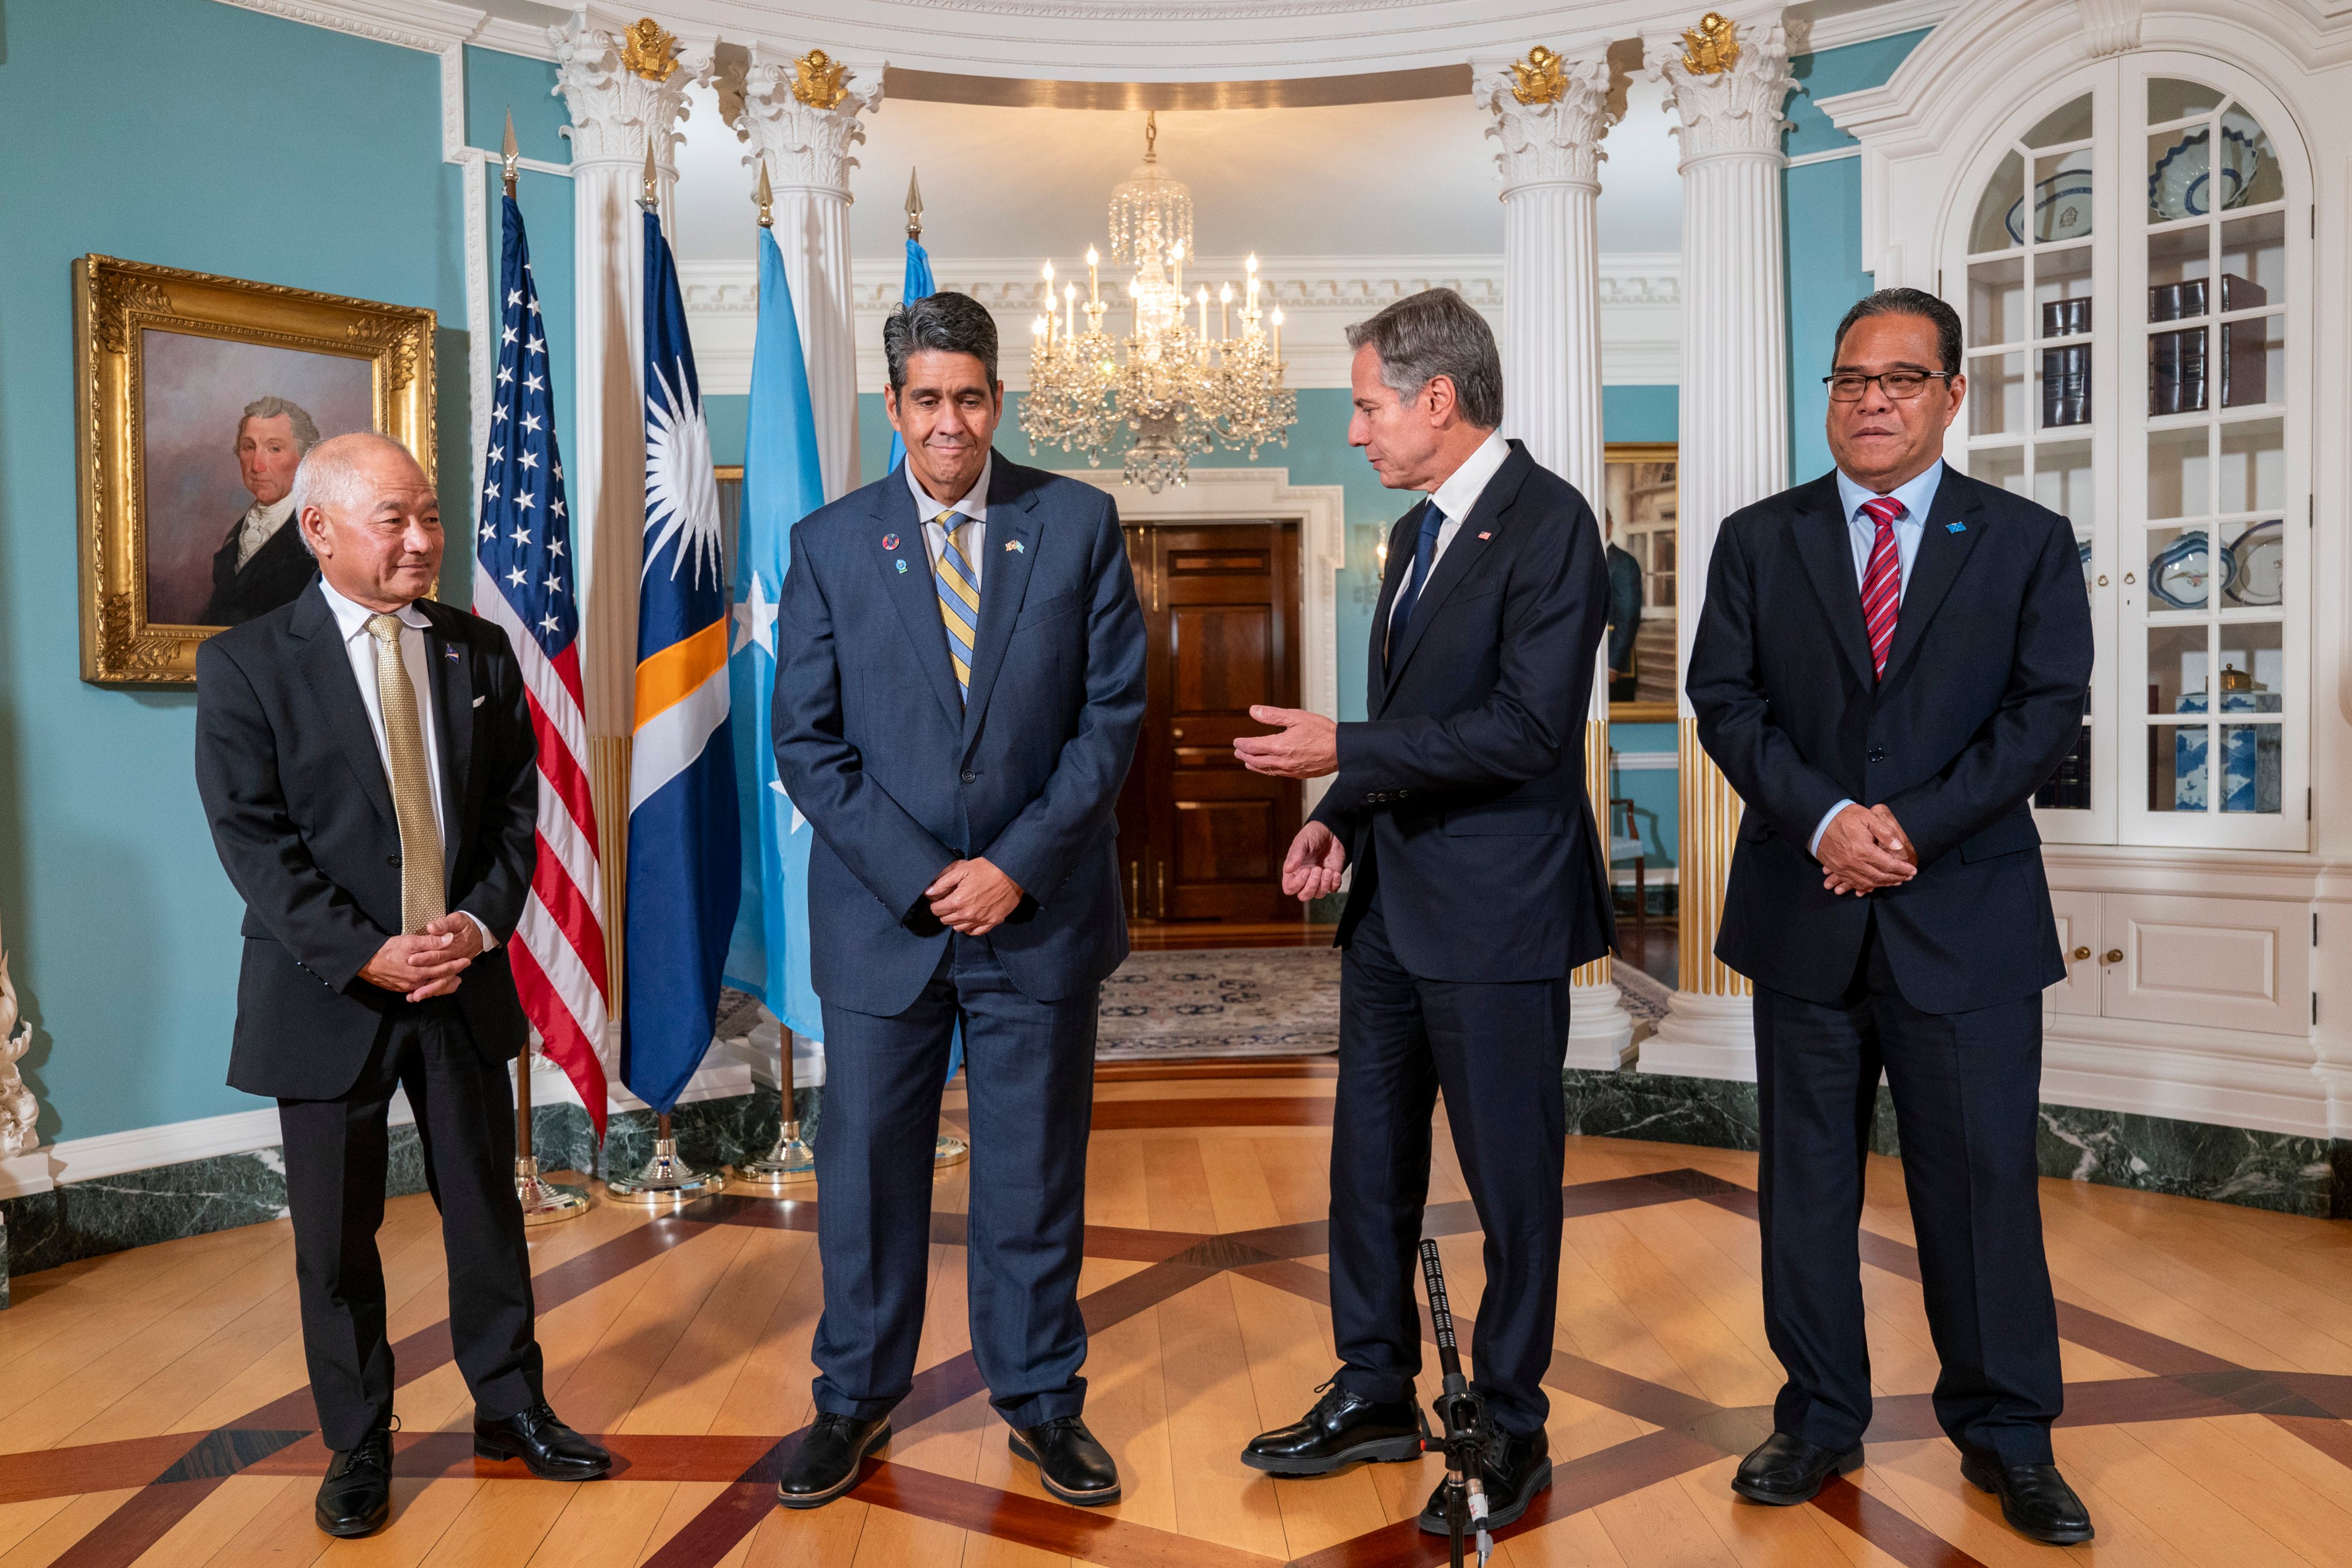 US Secretary of State Antony Blinken (centre right) meets with (from left) Marshall Islands Foreign Affairs and Trade Minister Jack Ading, Palauan President Surangel Whipps, Jnr and Micronesian President Wesley Simina at the State Department in Washington on Sept. 26. Photo: AP